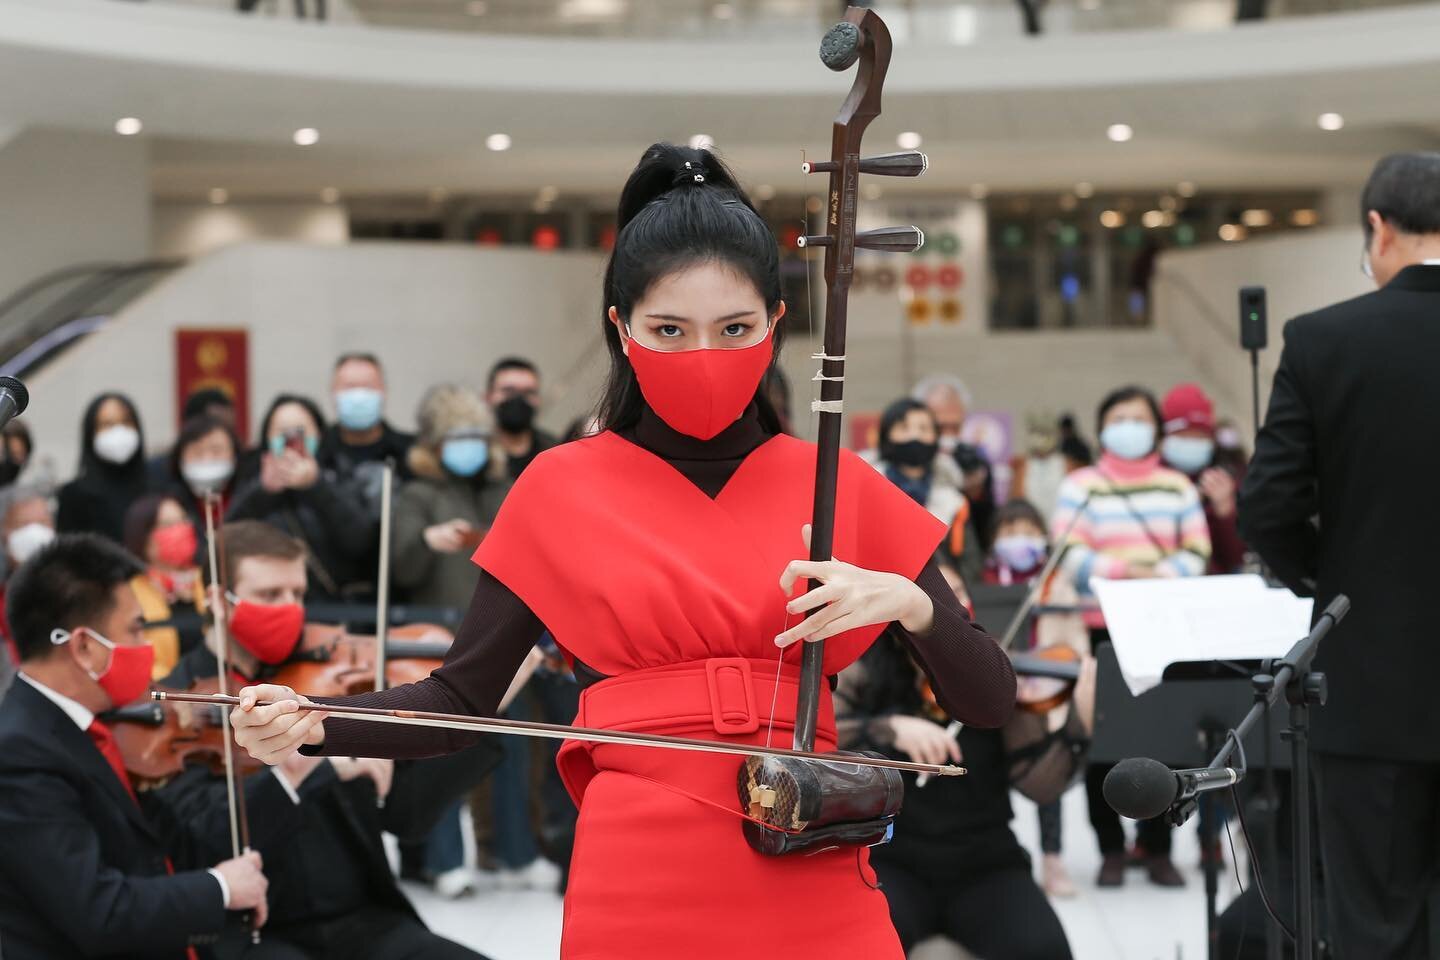 We were delighted to have Erhu Player Chen Yimiao @miaomiaoerhu at the Oculus Musical Performance. 

Photo: @theblancstudios

WTC Instagram: @_wtcofficial
WTC Twitter: https://twitter.com/_WTCOfficial
WTC Facebook: https://www.facebook.com/TheWorldTr